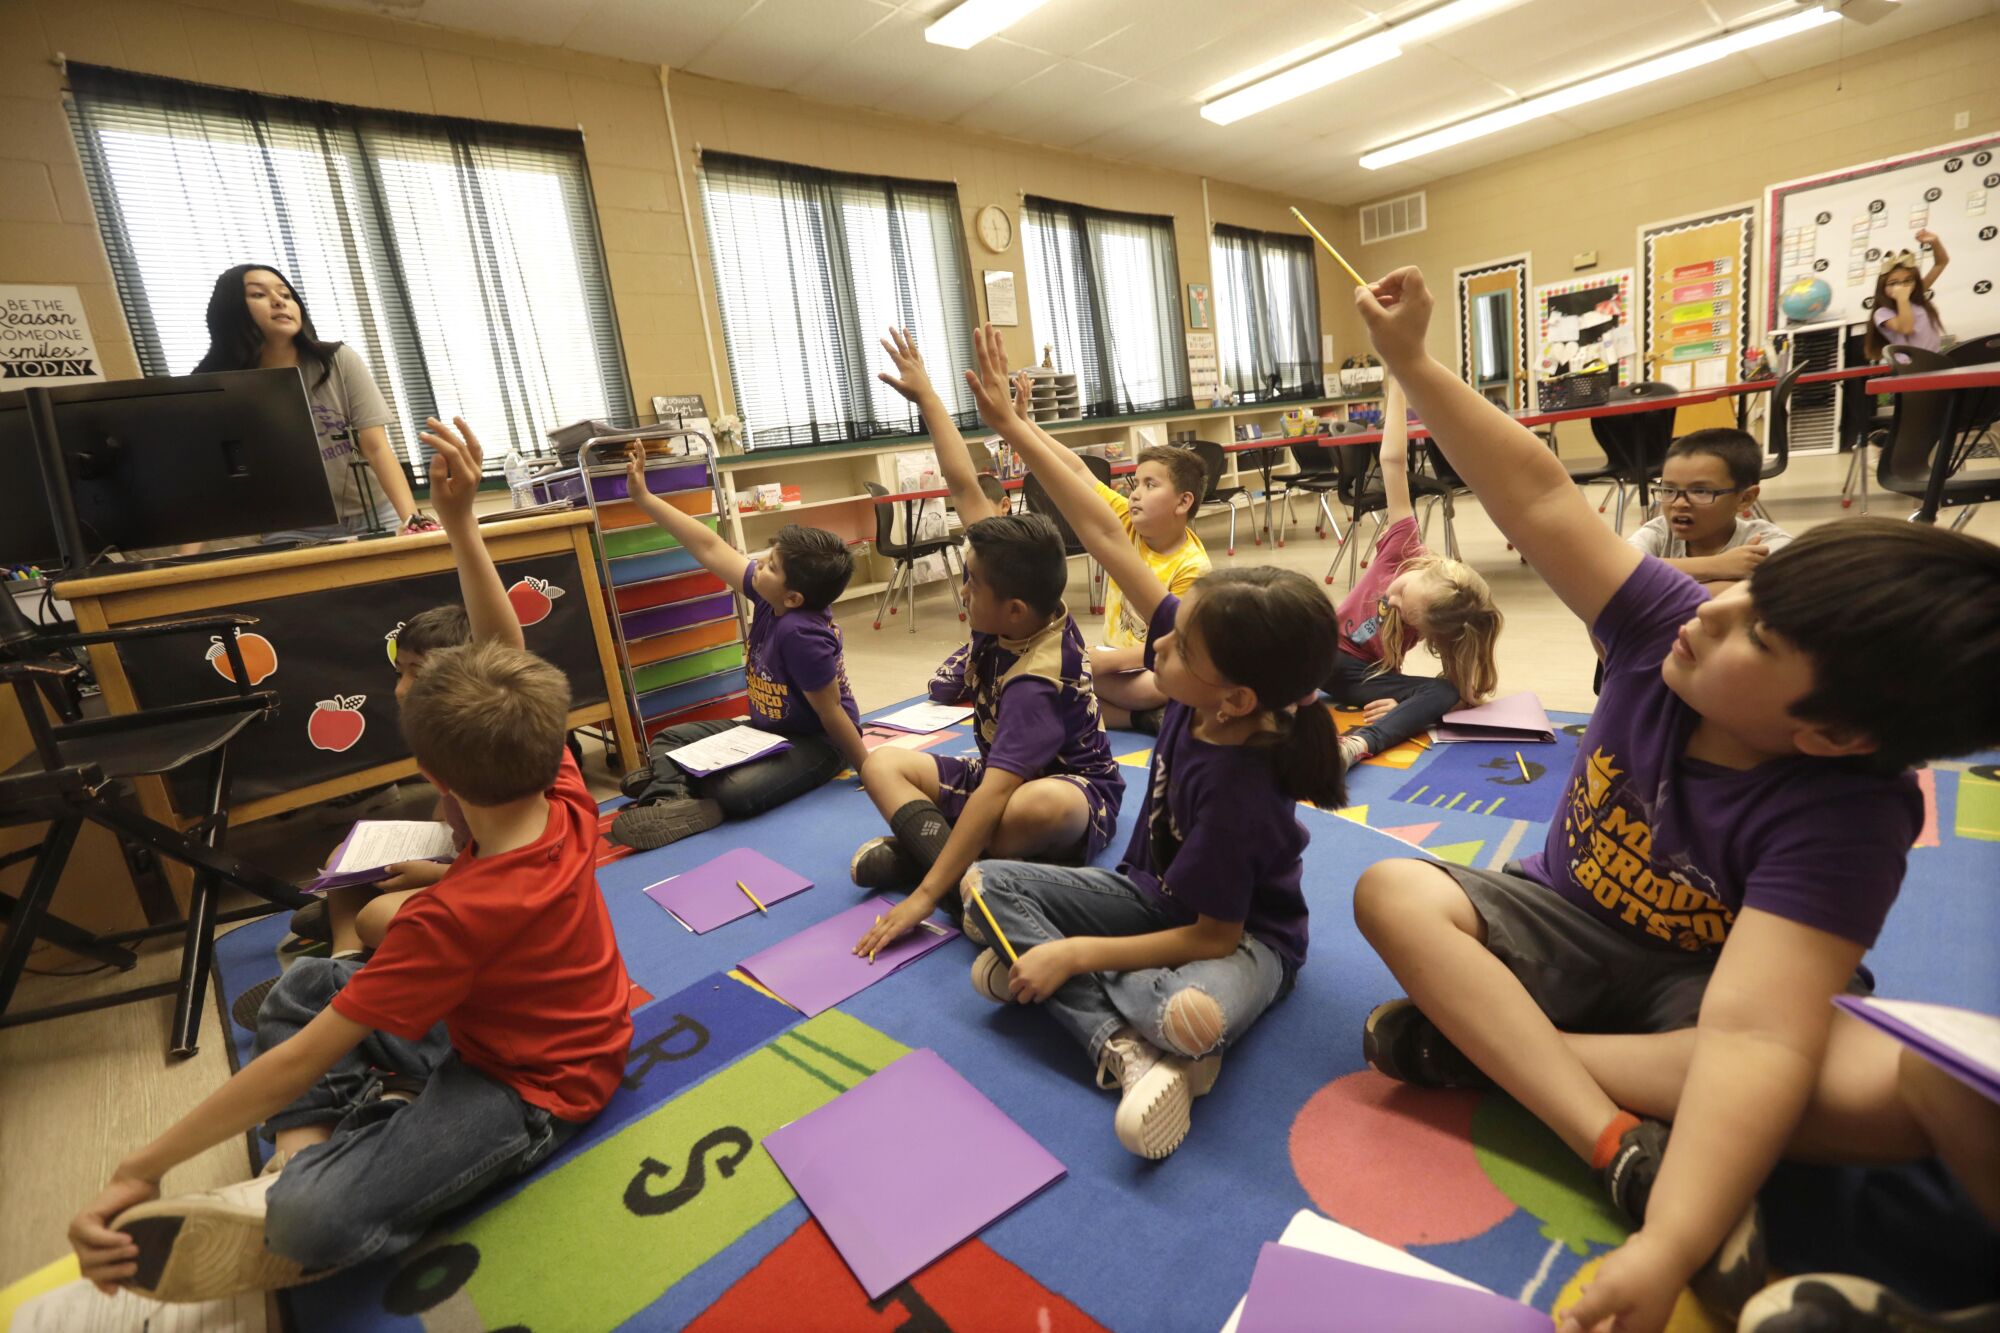 Second grade students raise their hands to answer a question during a math class at Meadow School